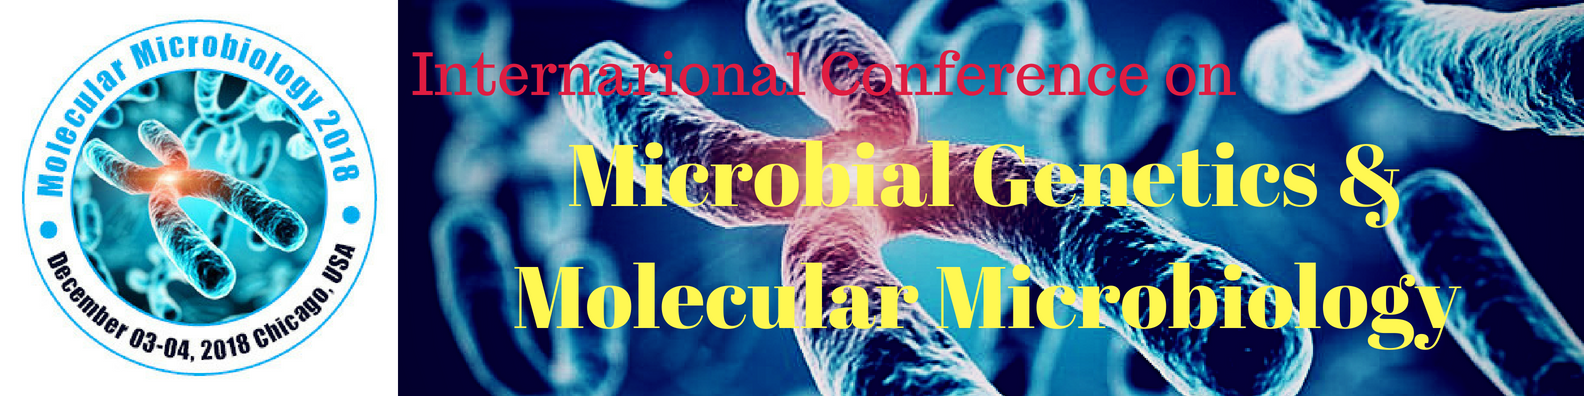 International Conference on Microbial Genetics & Molecular Microbiology, Chicago, Illinois, United States